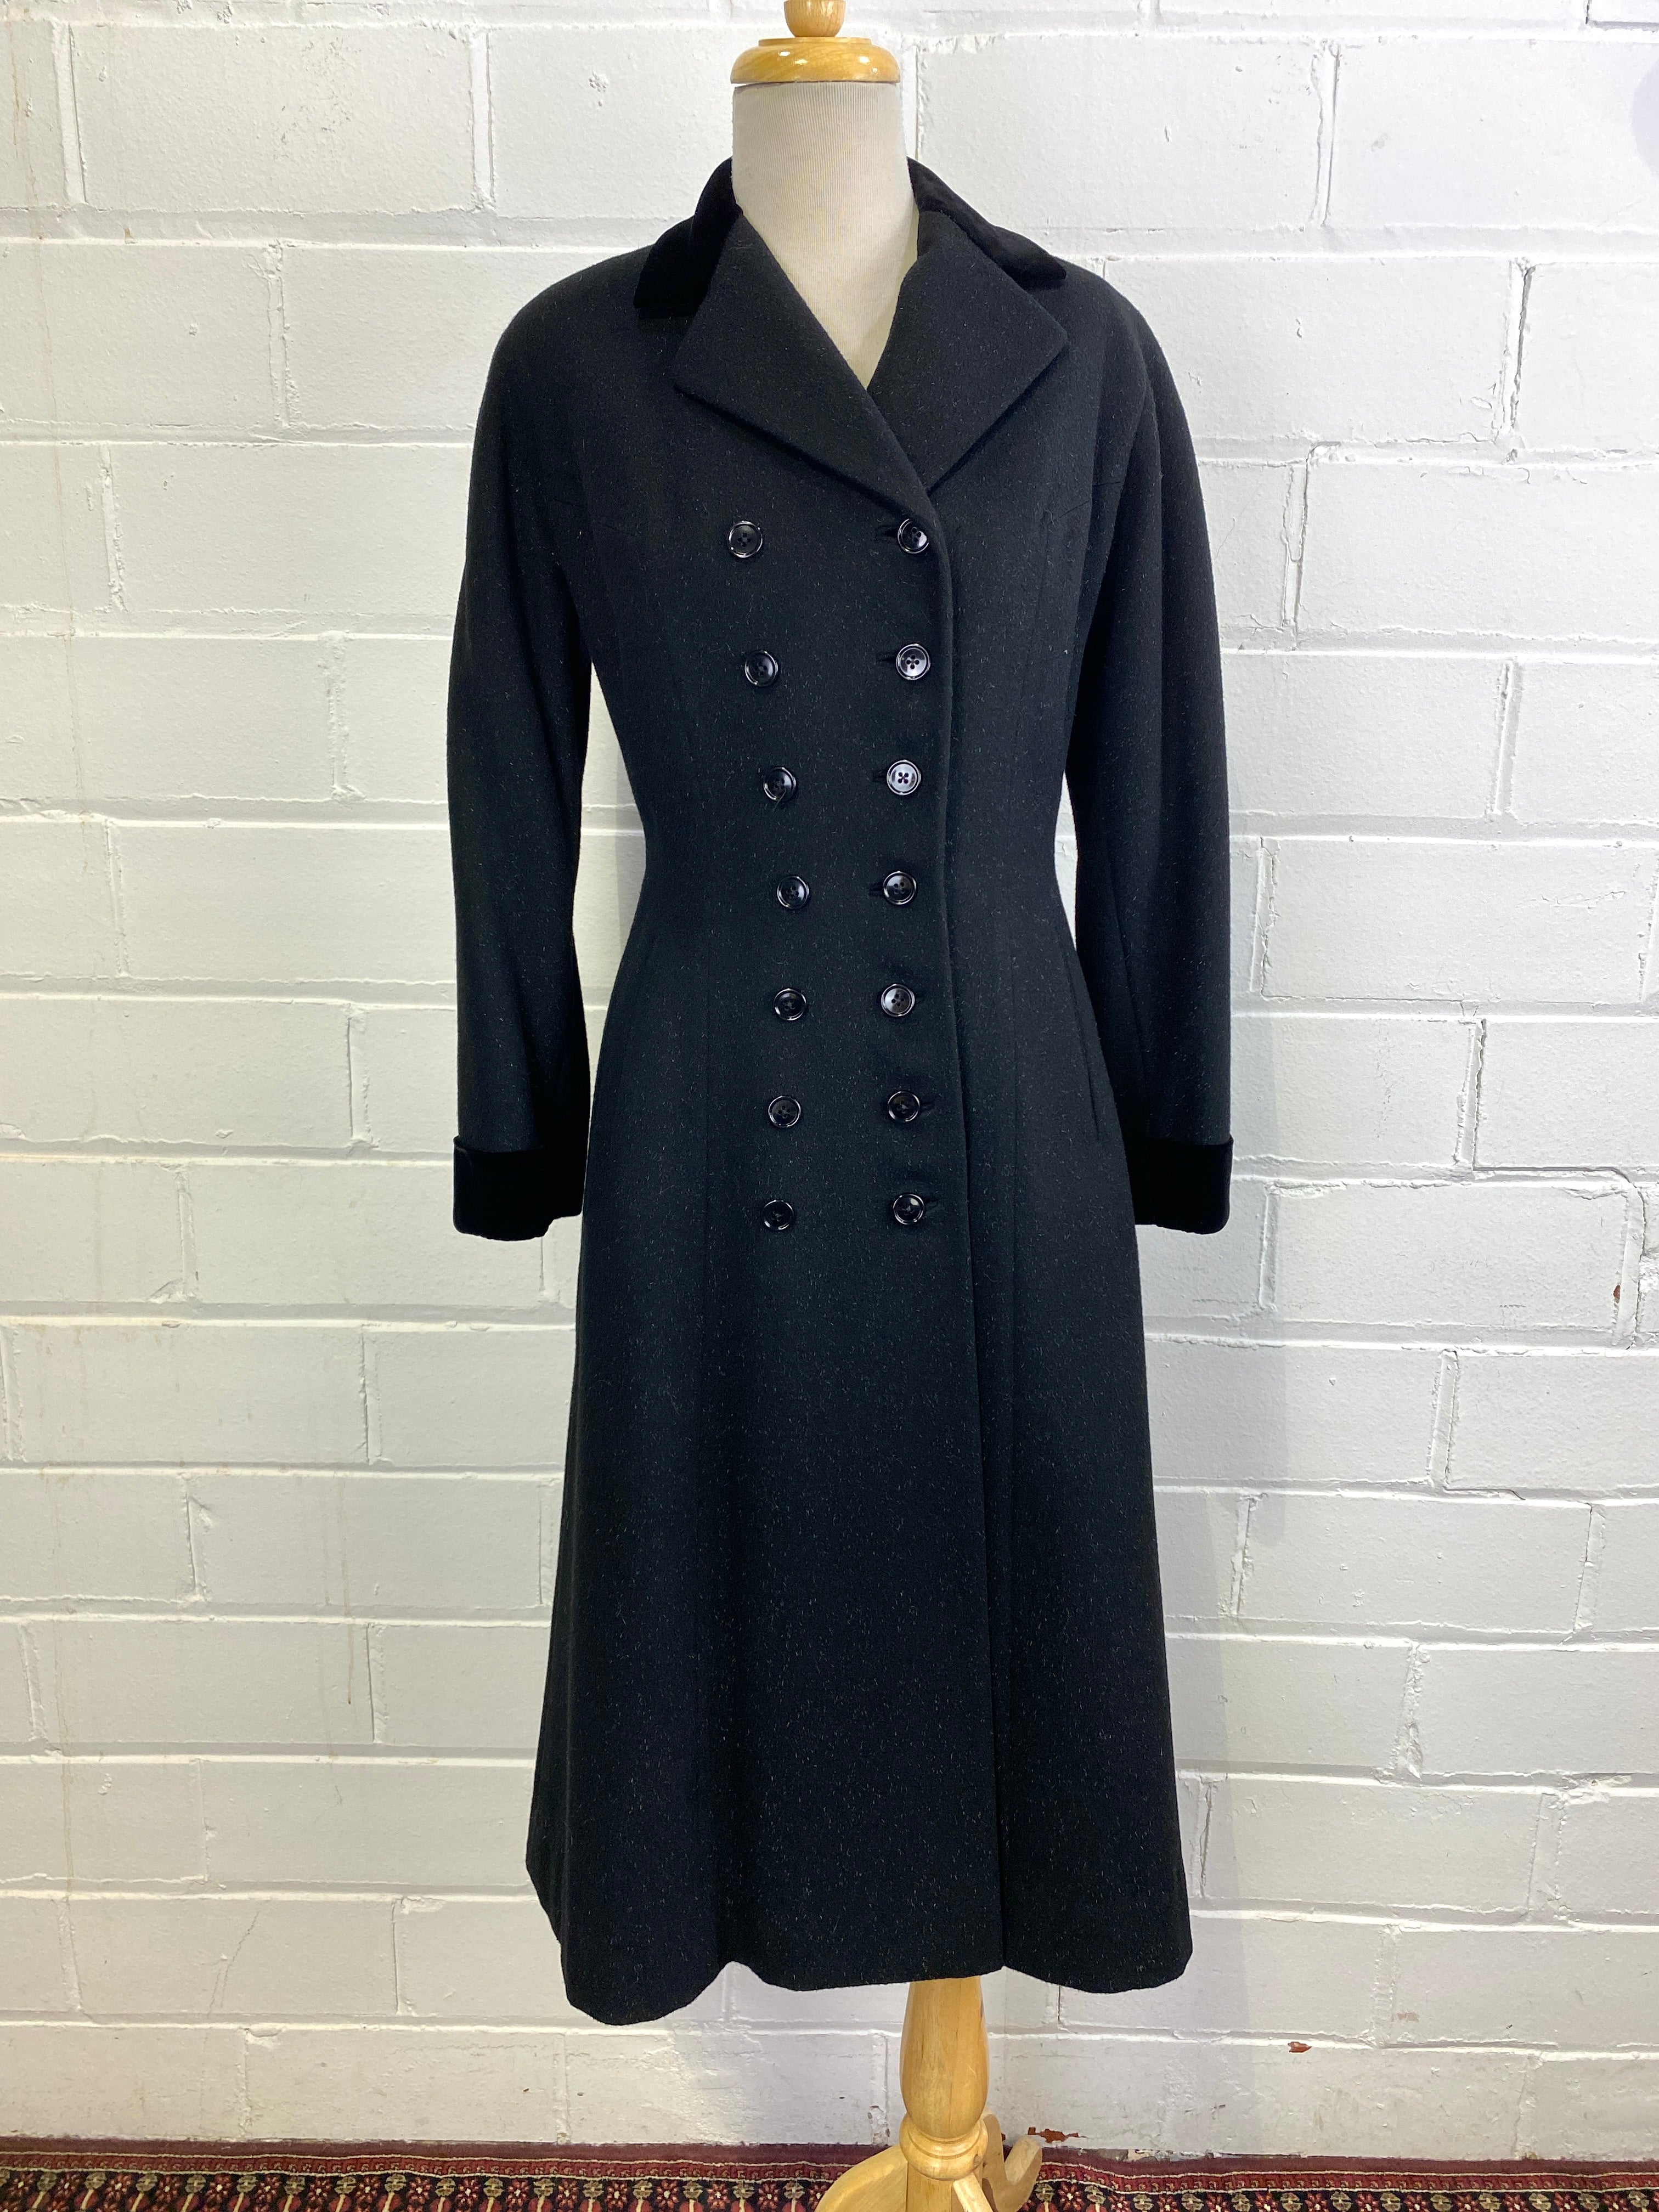 Vintage 1950s Black Wool Military-Style Double Breast Coat